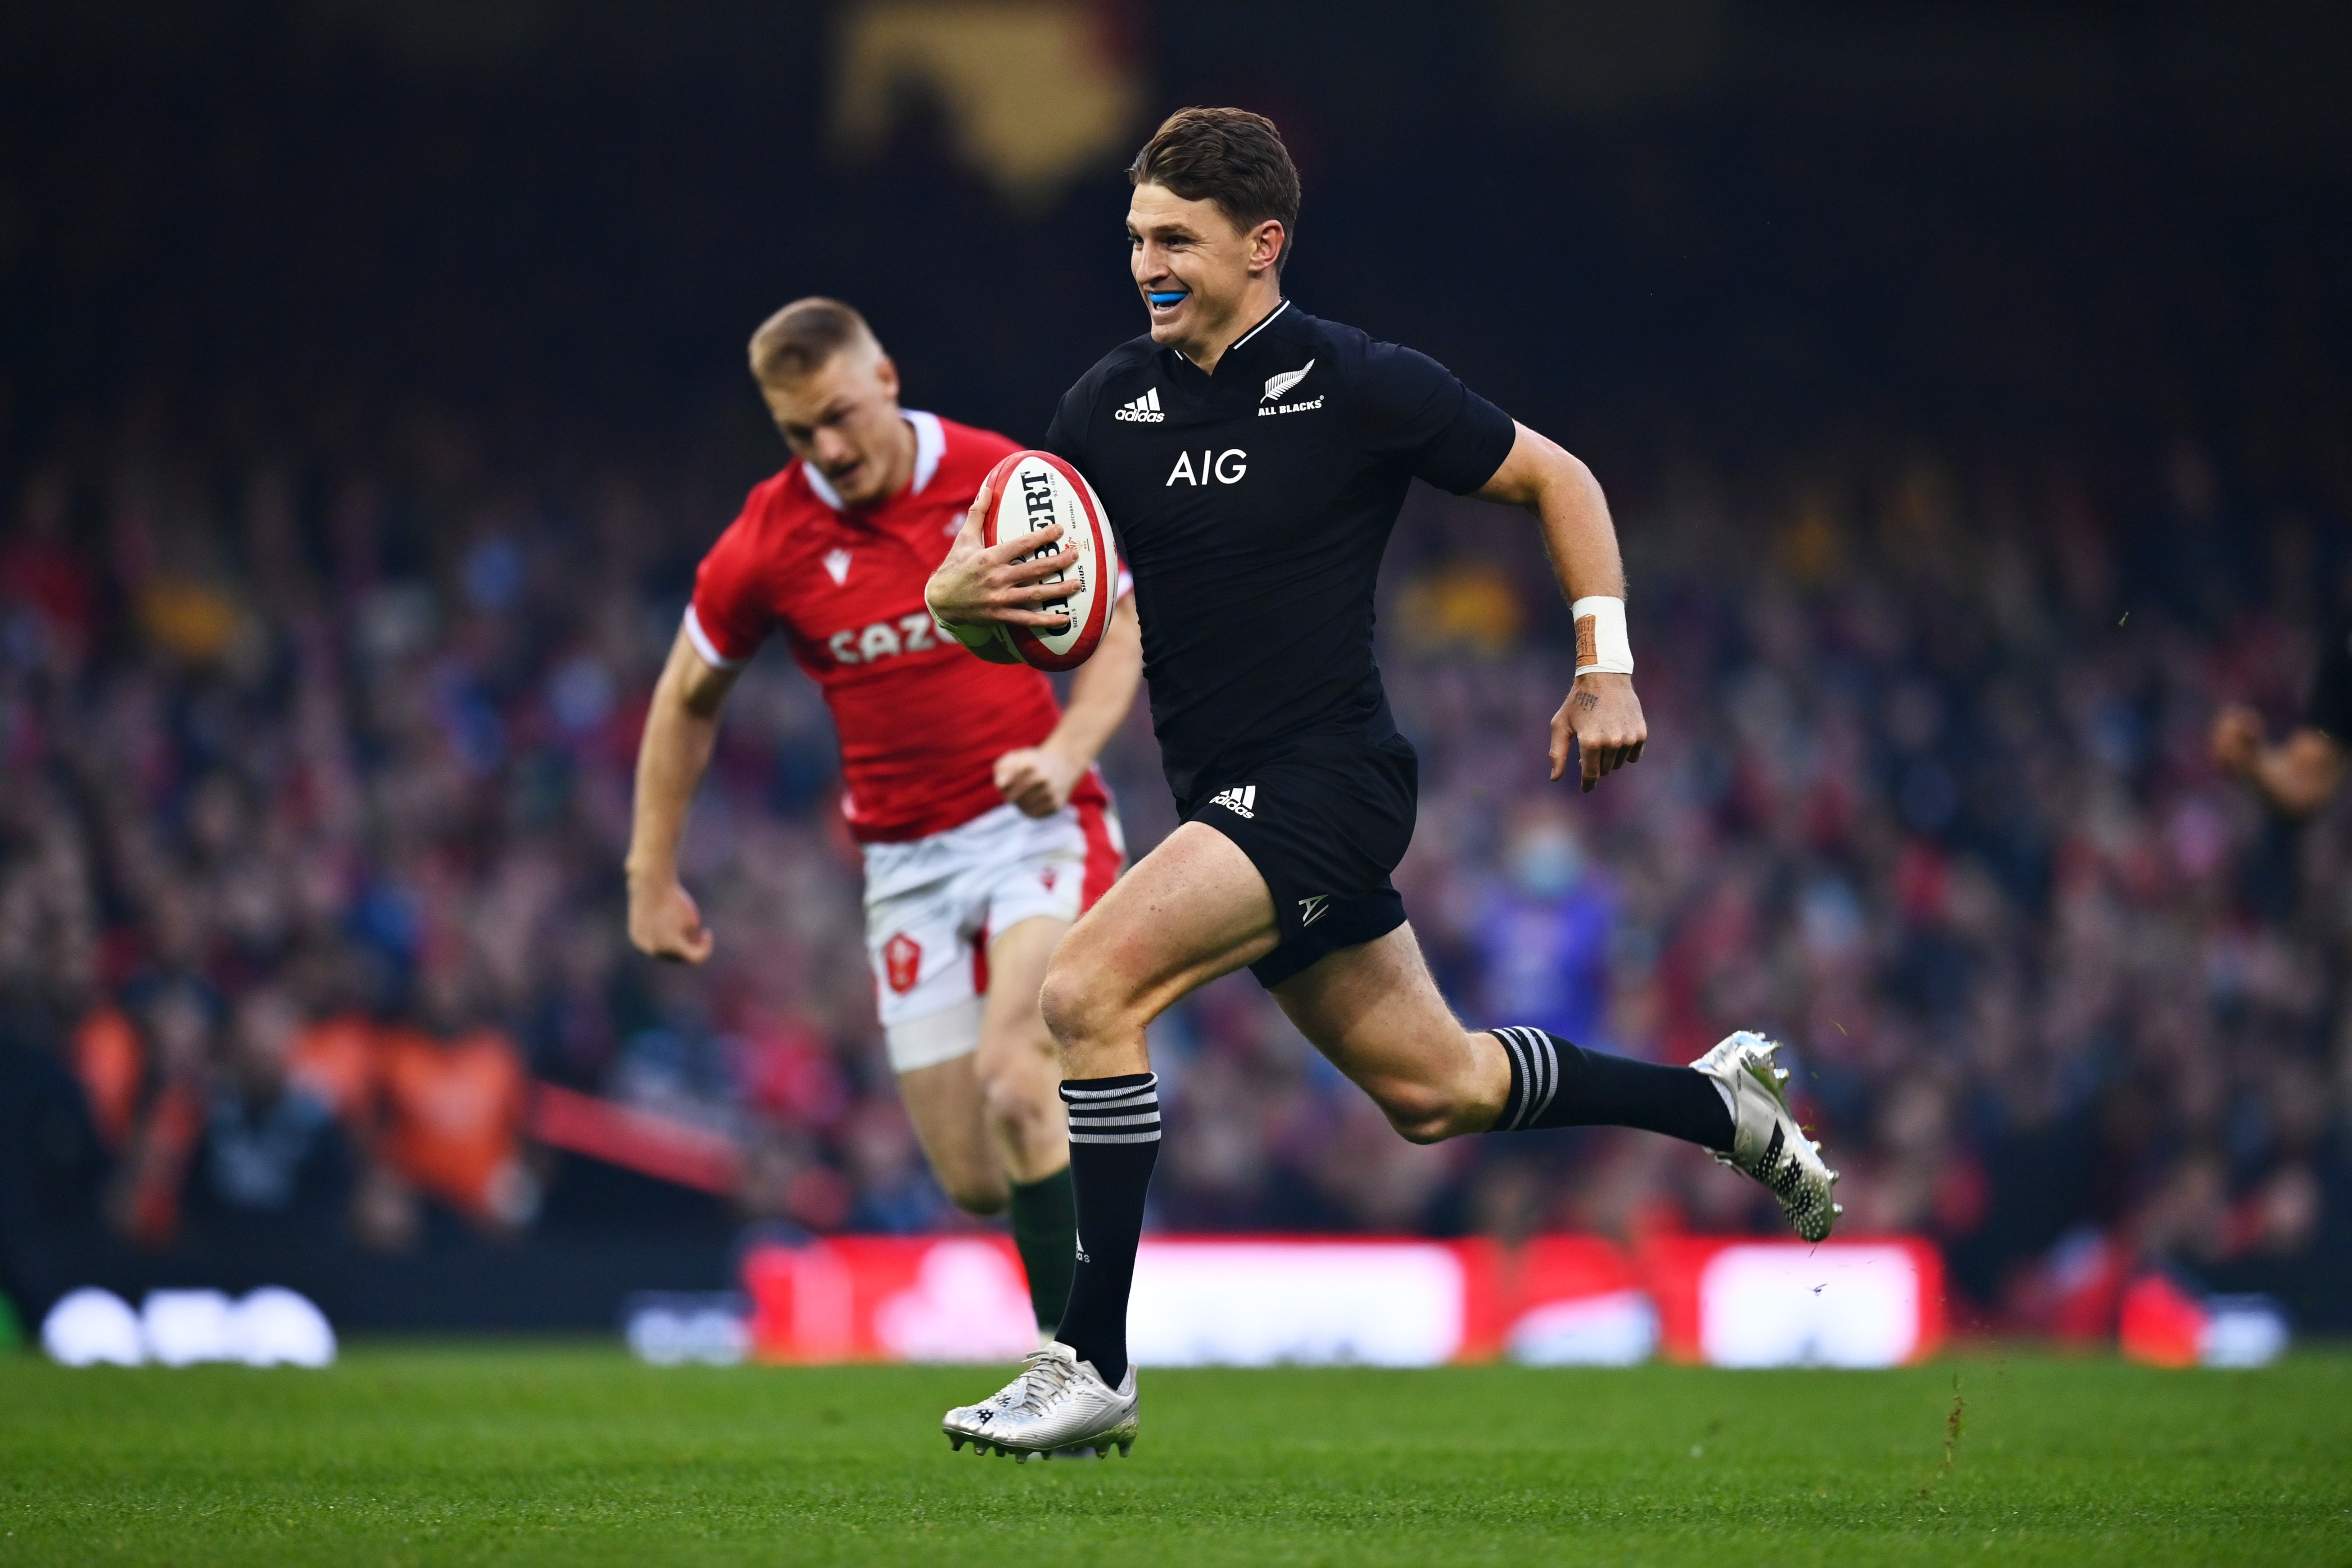 Beauden Barrett smiles as he runs in the first try